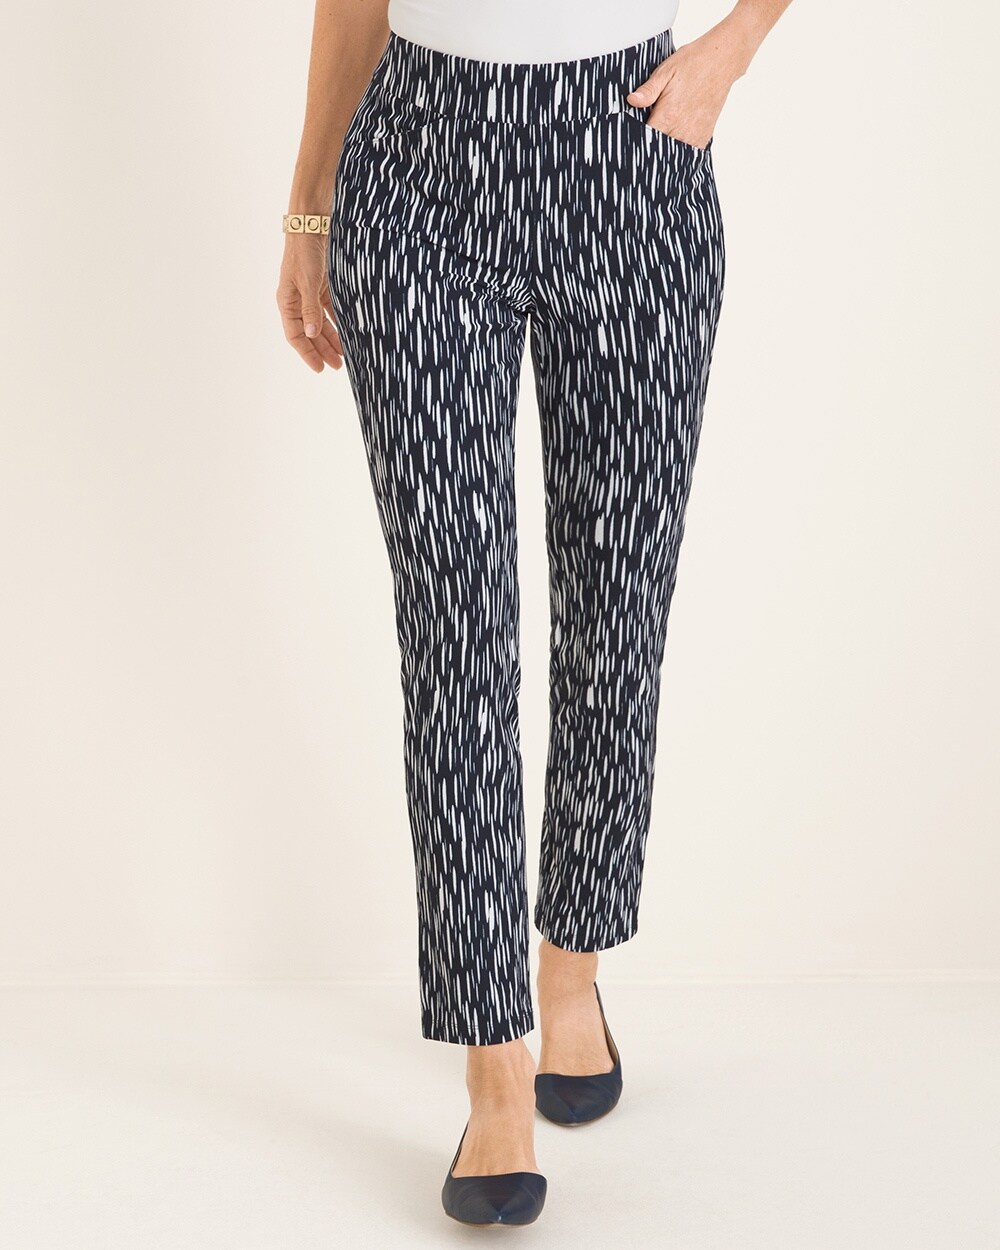 Travelers Collection Printed India Ink Crepe Ankle Pants